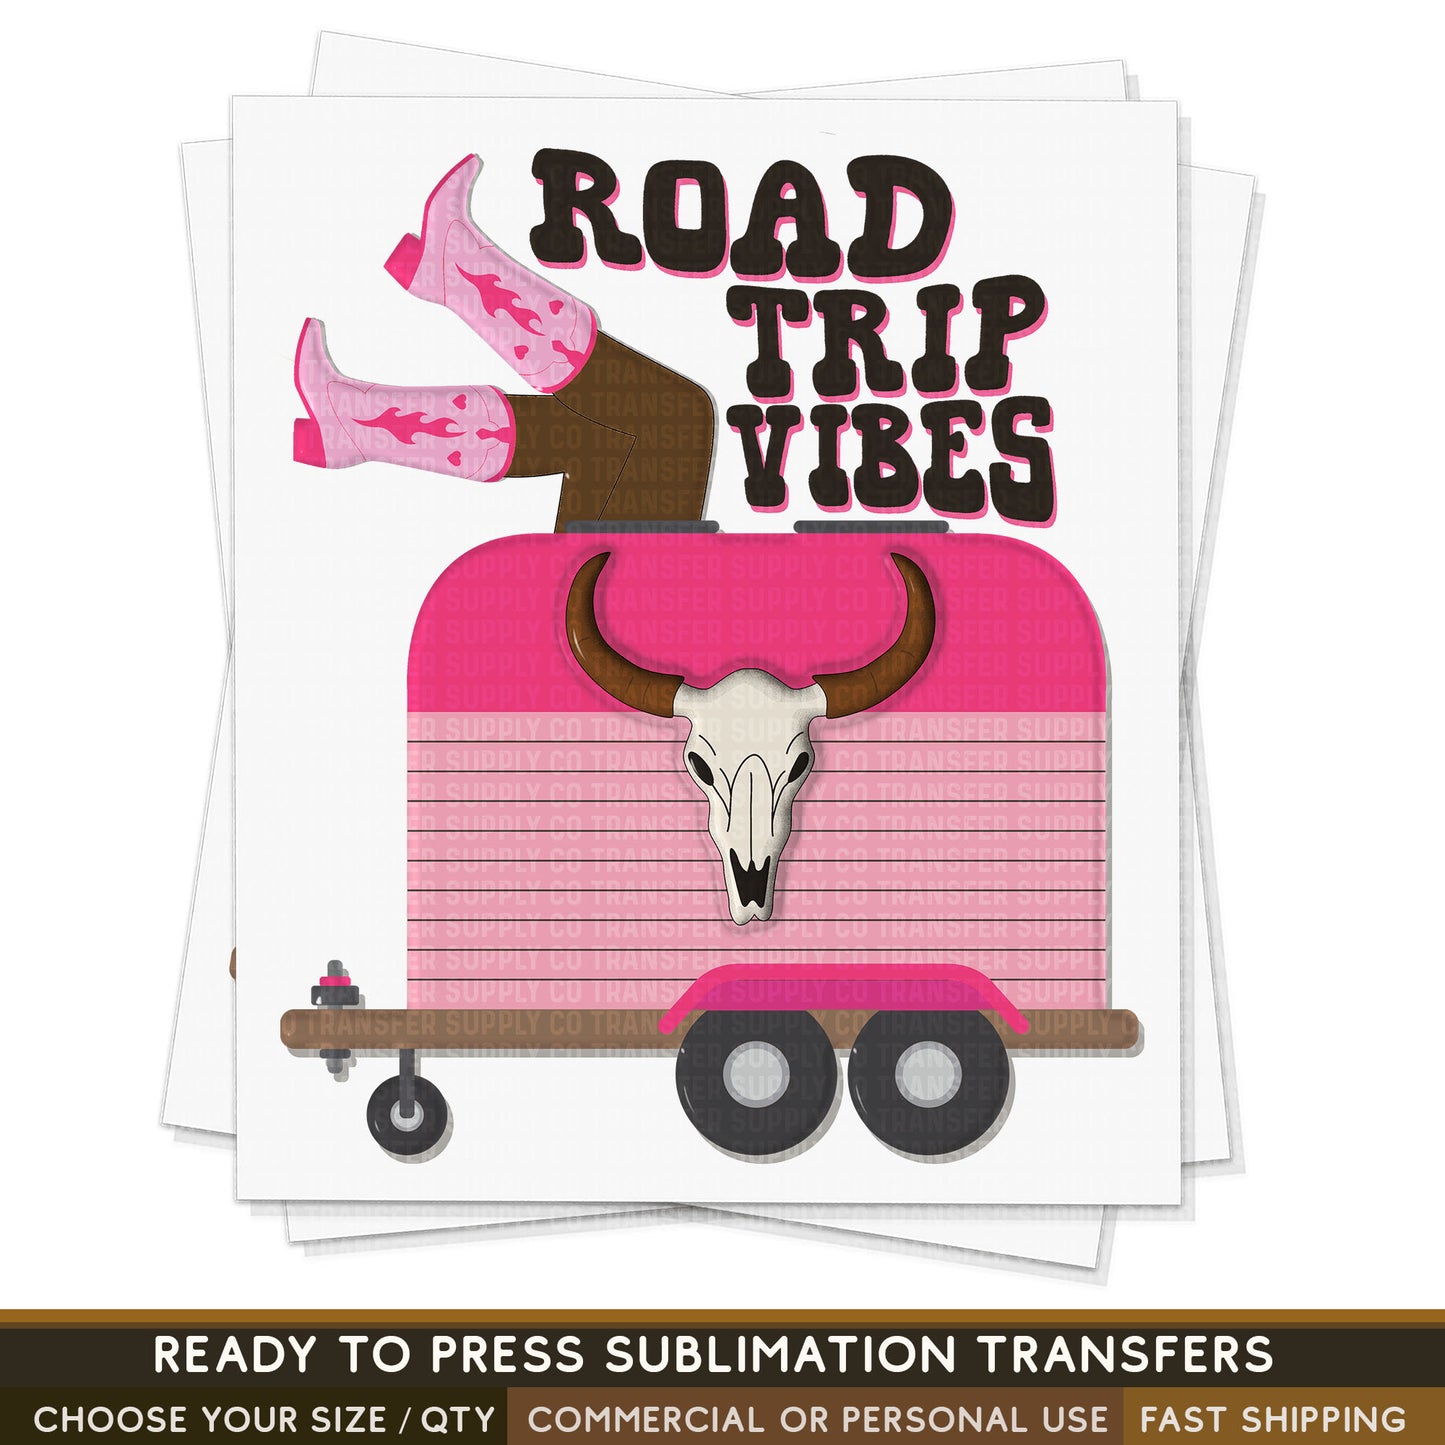 Road Trip Vibes Wild West Western, Ready To Press Sublimation Transfers, Ready To Press Transfers, Sublimation Print